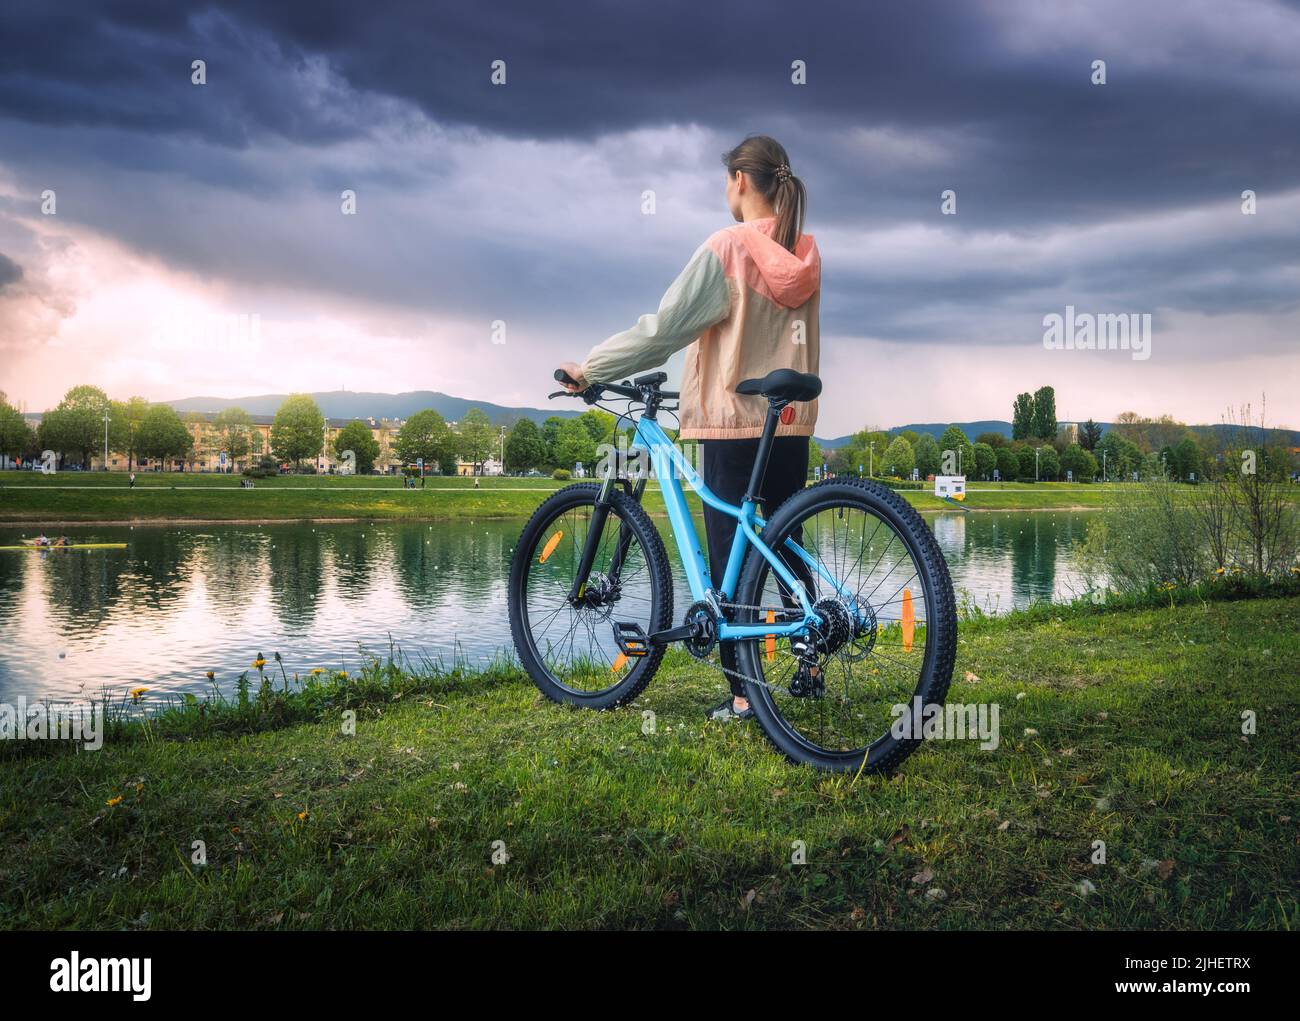 Woman riding a mountain bike near lake and overcast sky in sprin Stock Photo